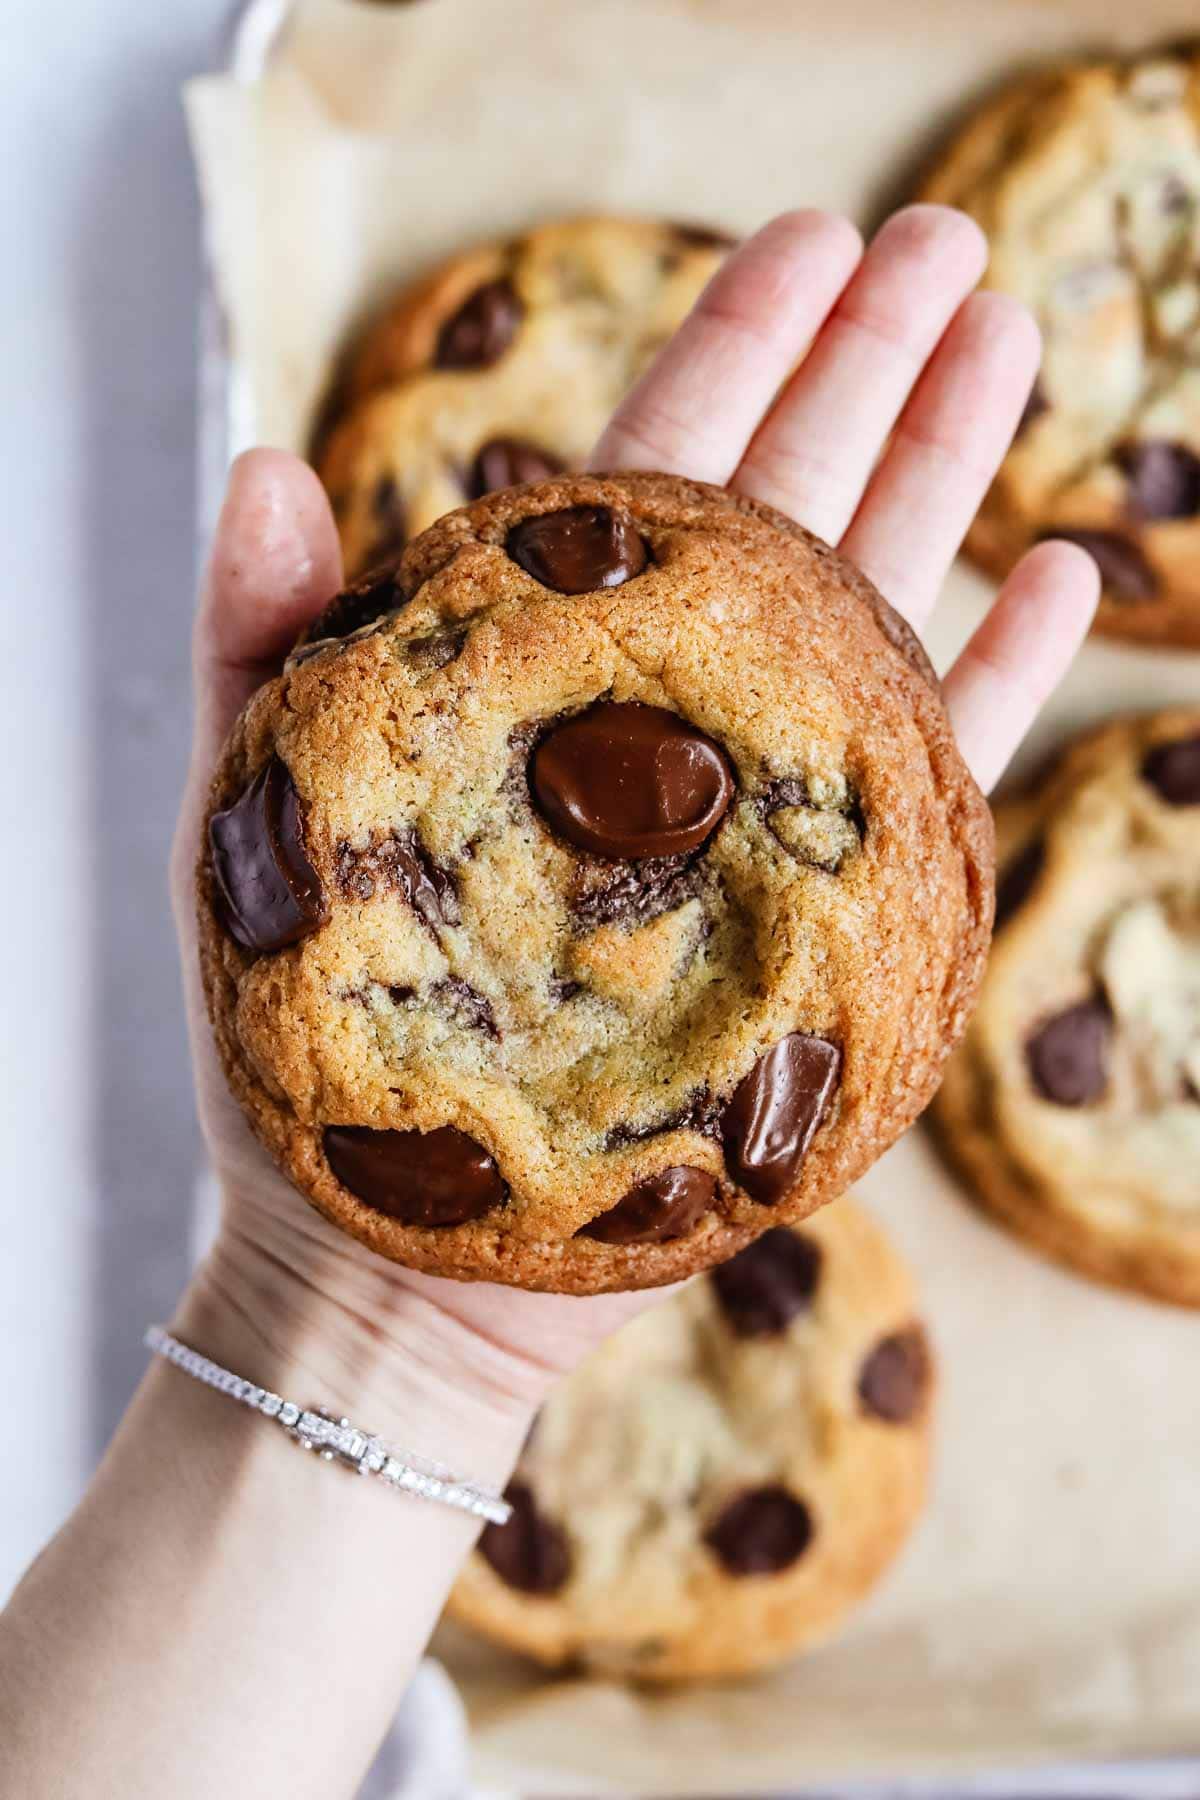 Hand holding a giant bakery-style chocolate chip cookie with crispy edges and a chewy center.